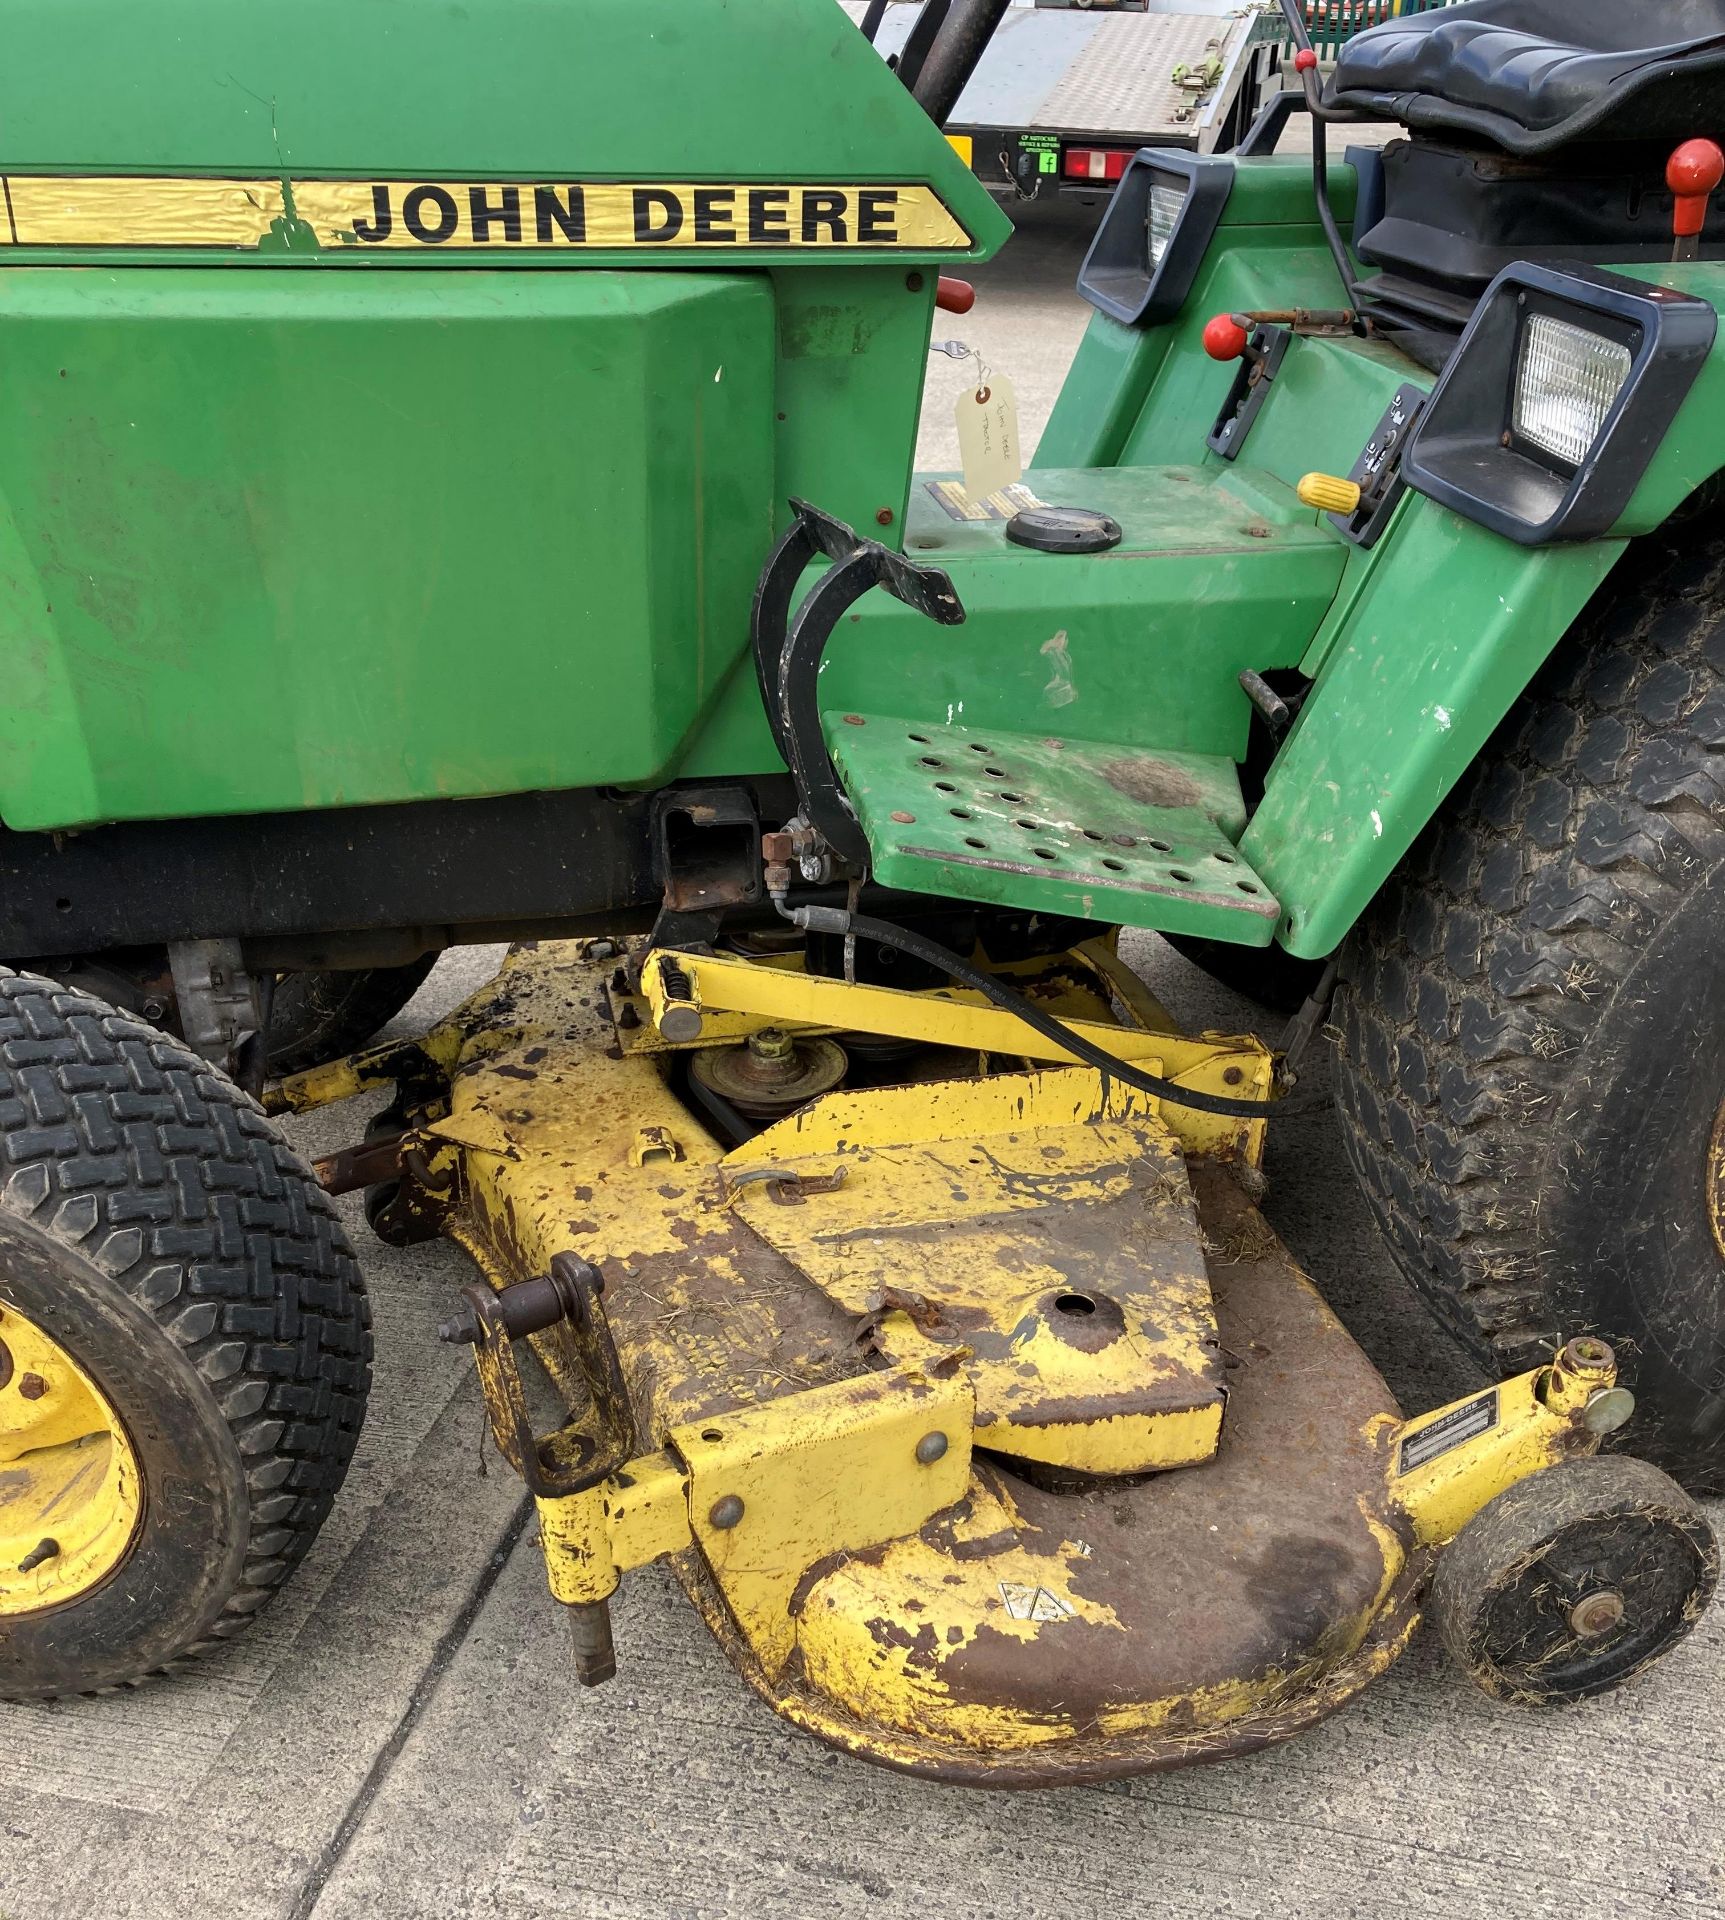 JOHN DEERE 755 HYDROSTATIC 4X4 TWIN PTO TRACTOR/GRASS CUTTER - three point linkage. - Image 10 of 13